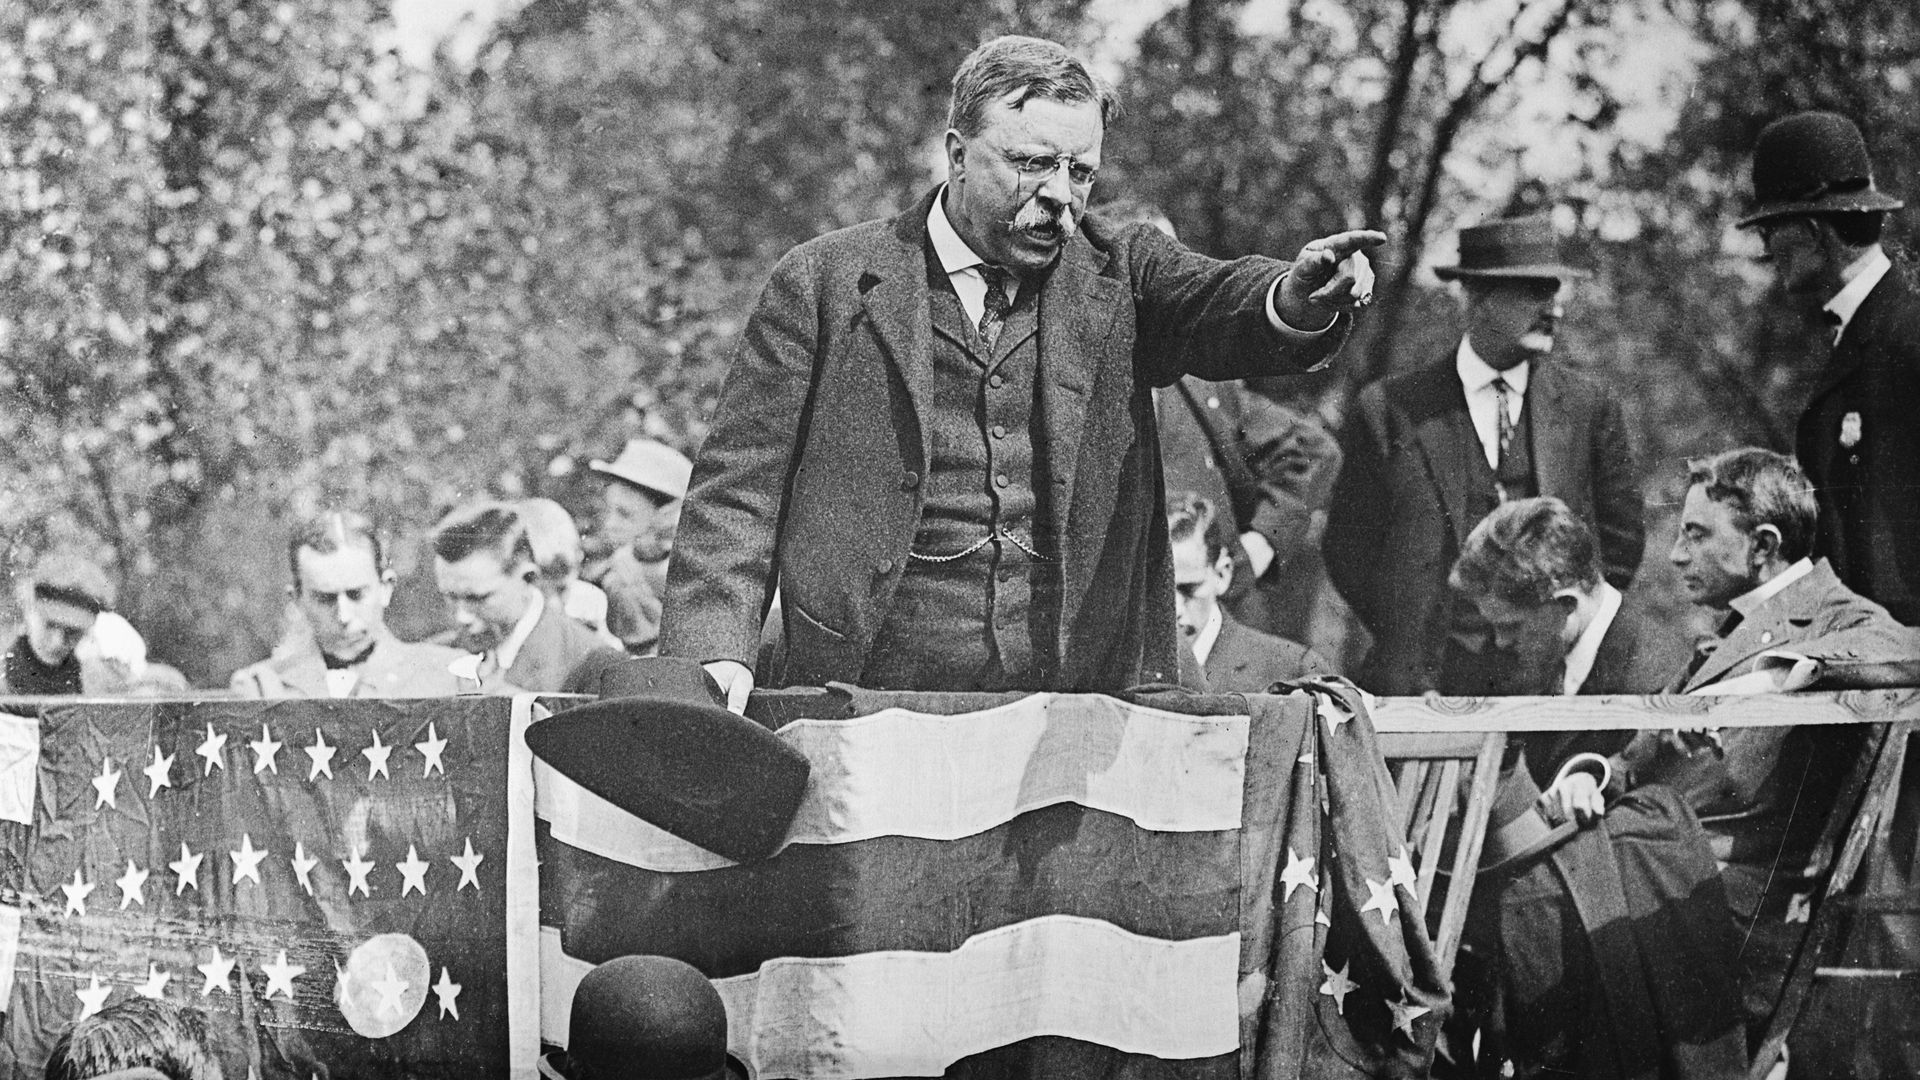 Roosevelt campaigning